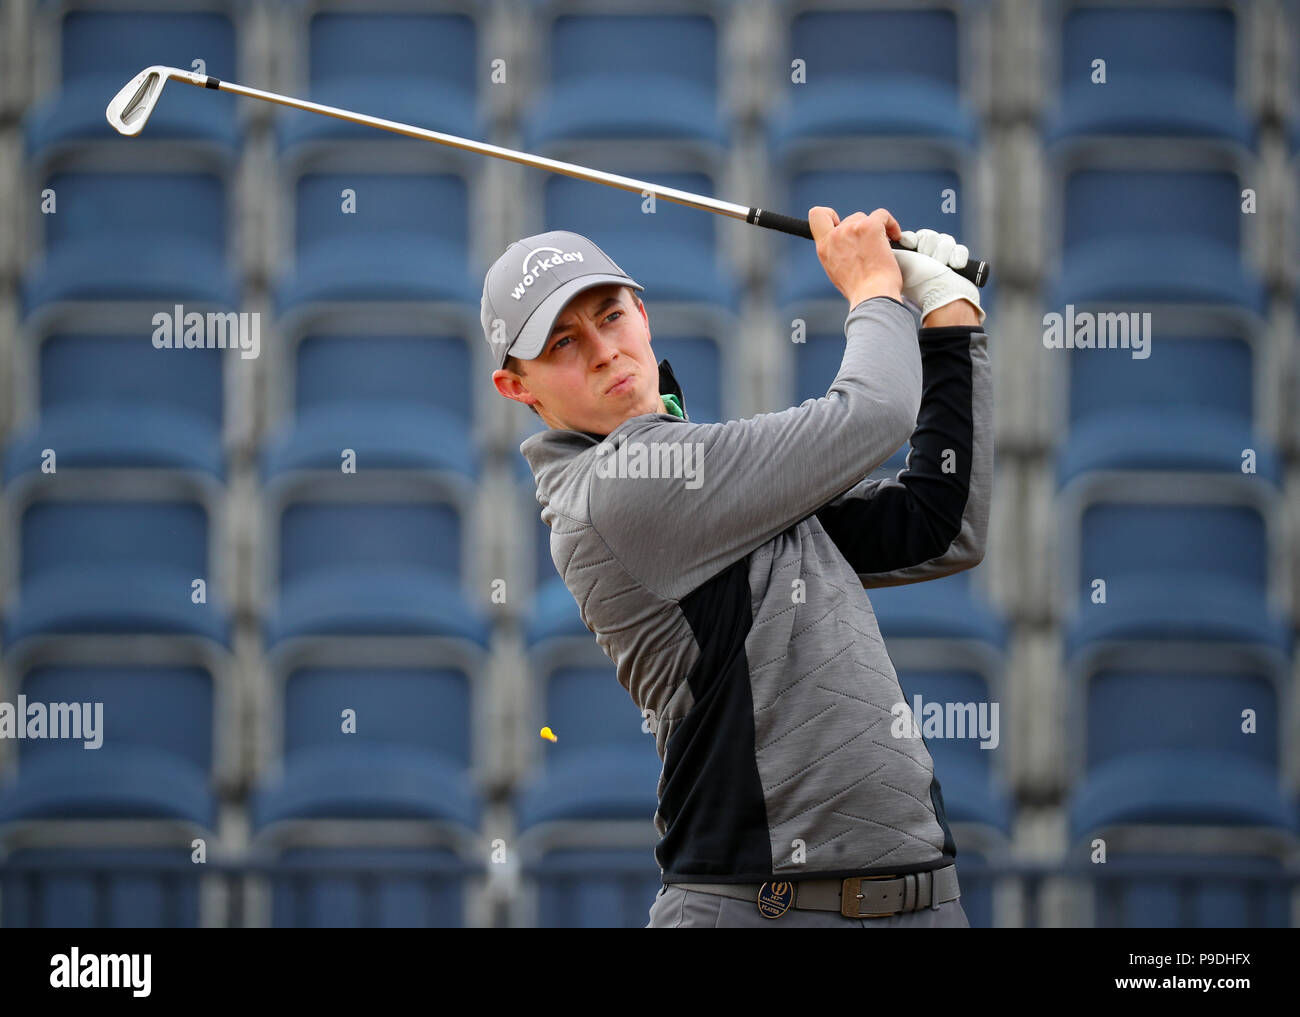 England's Matthew Fitzpatrick tees off the 3rd during preview day three of The Open Championship 2018 at Carnoustie Golf Links, Angus. PRESS ASSOCIATION Photo. Picture date: Tuesday July 17, 2018. See PA story GOLF Open. Photo credit should read: Jane Barlow/PA Wire. Stock Photo